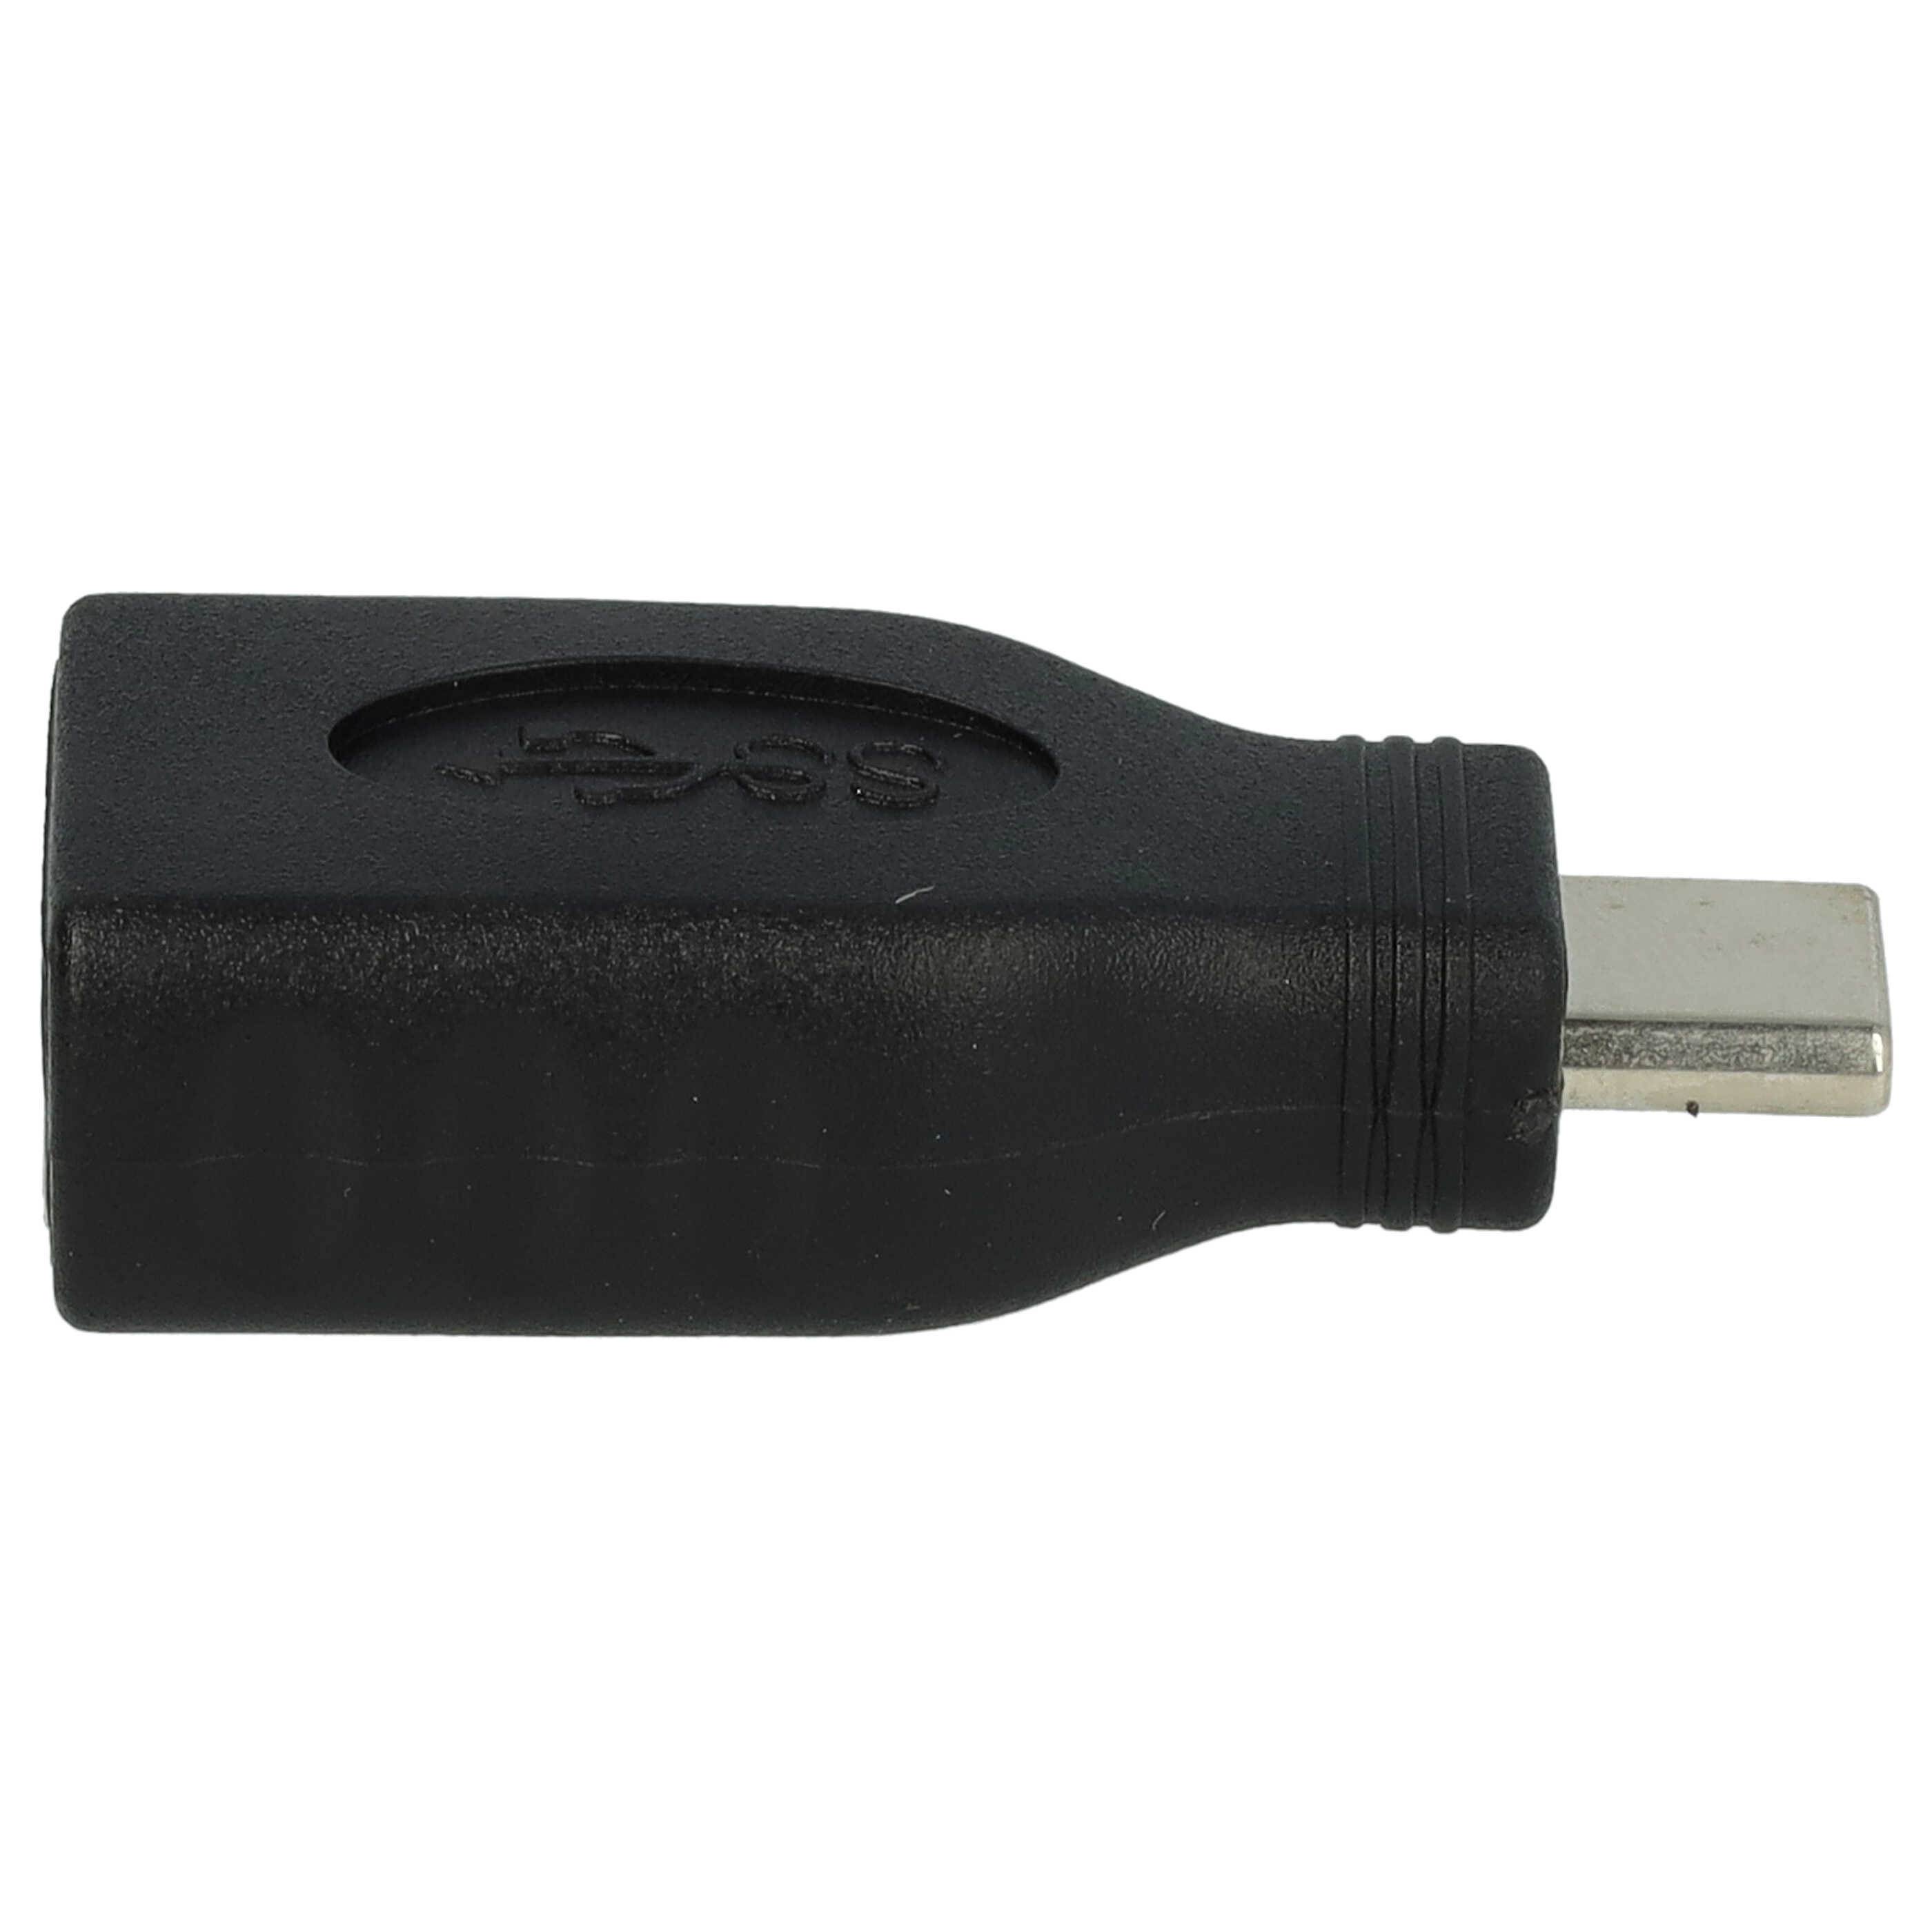 Adapter USB Type C to USB 3.0 suitable for Liquid Jade Primo Acer - USB Adapter Black